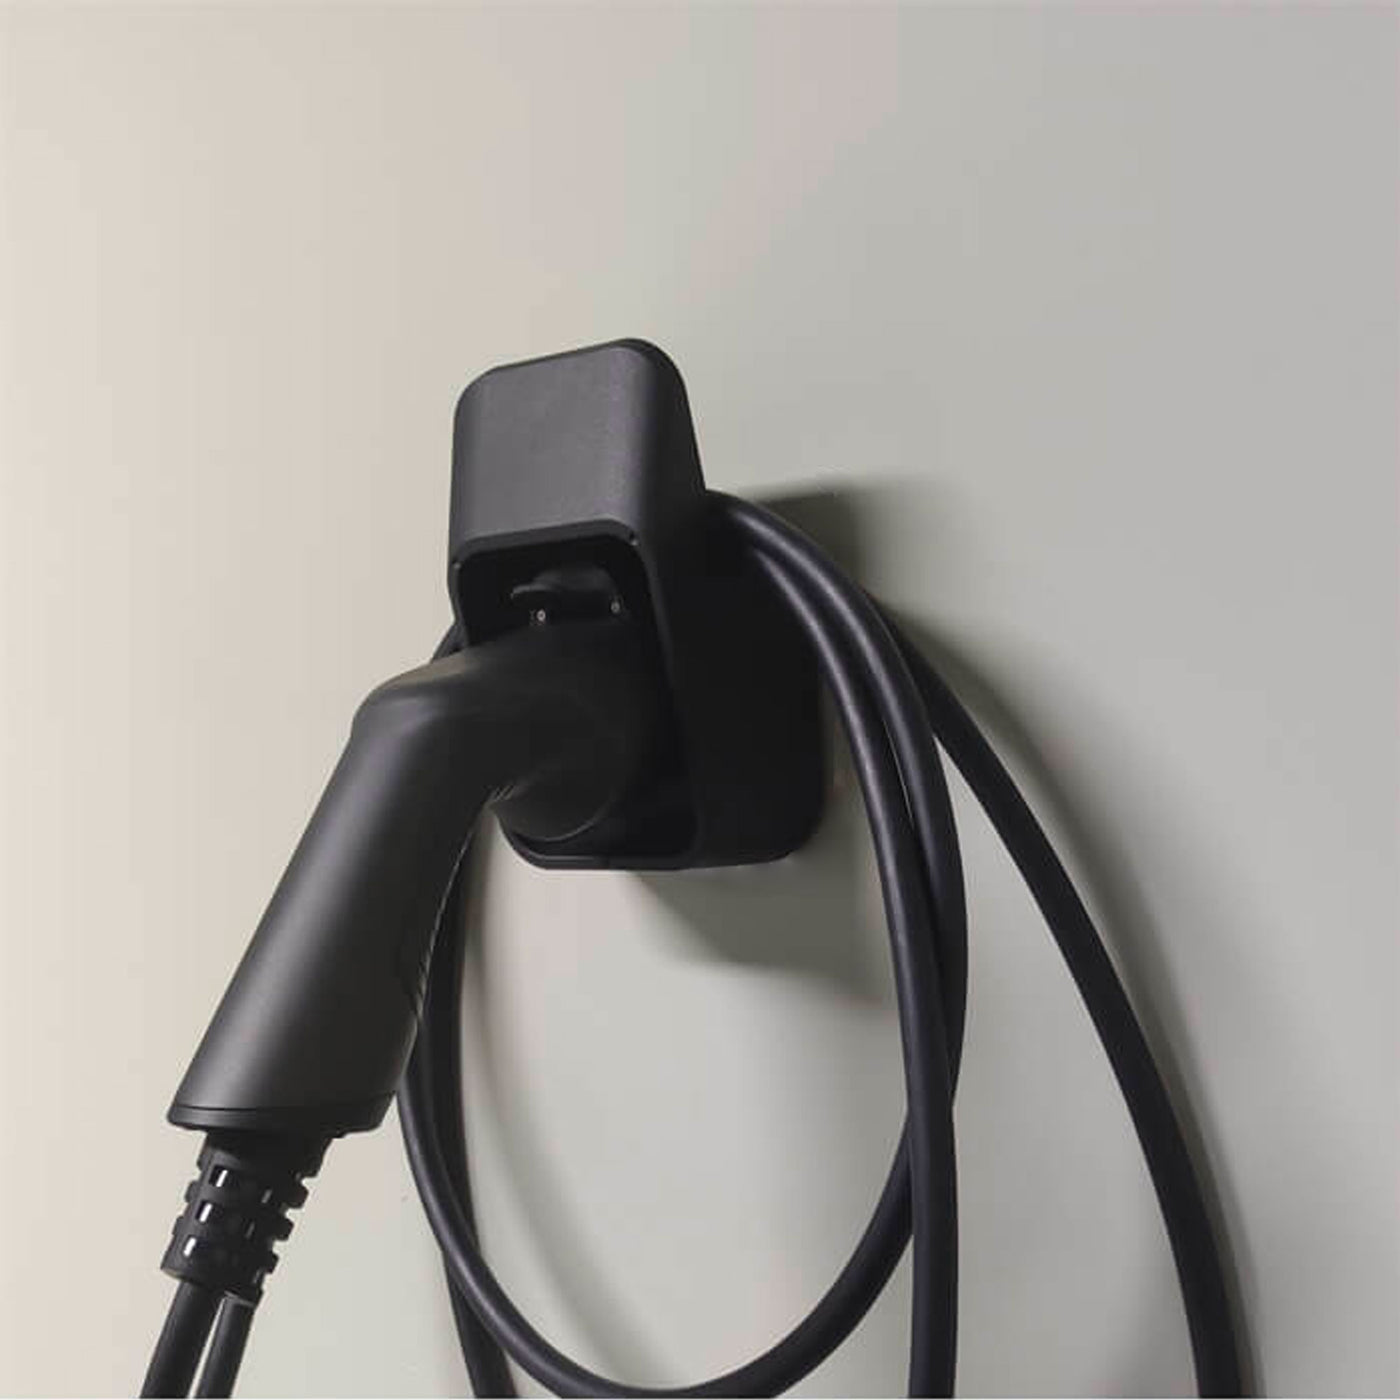 Type 2 cable holder for electric cars